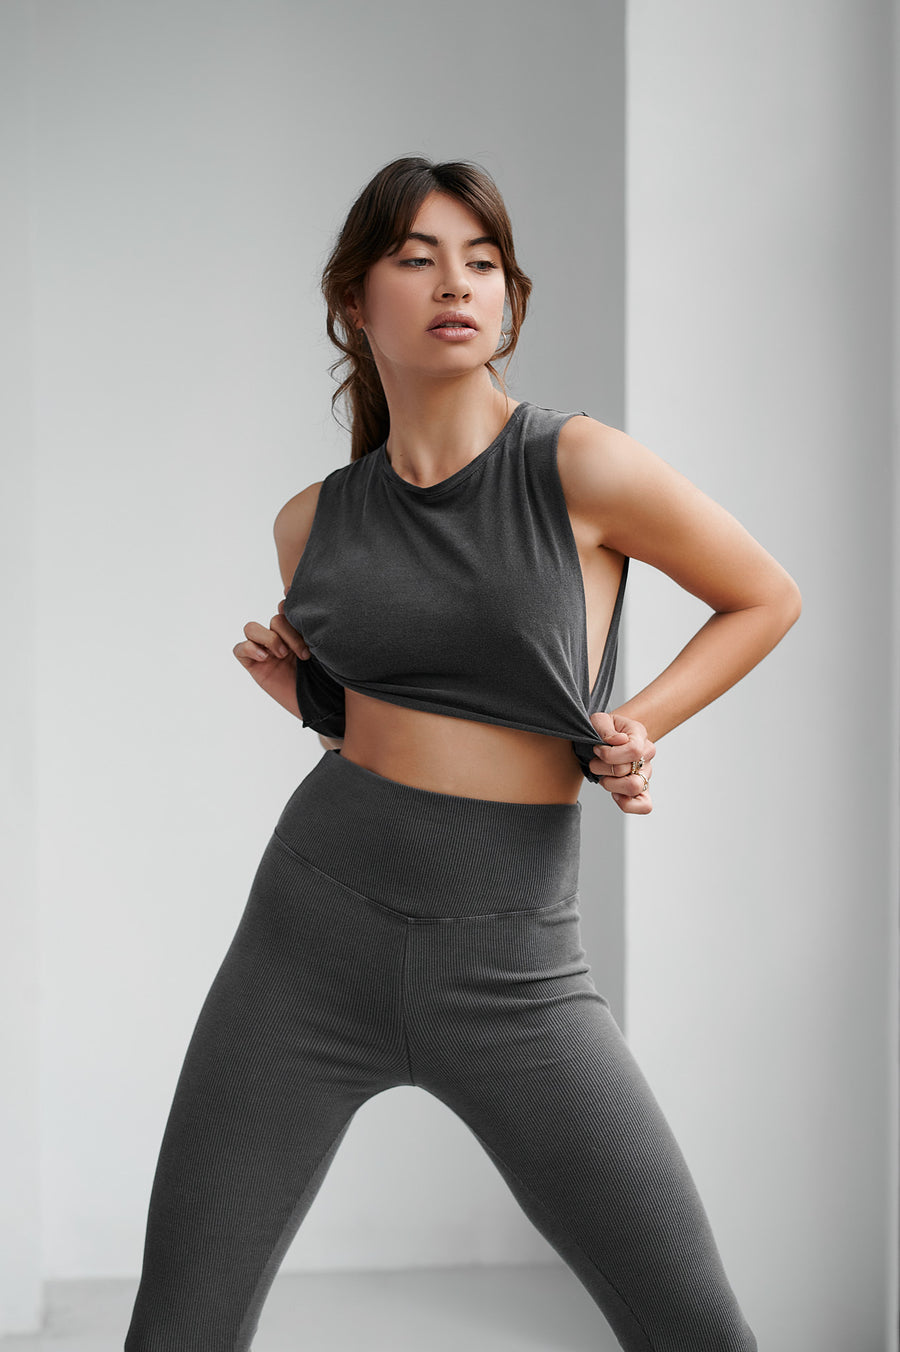 Fika Tank Top - Charcoal Gray -  Front Side - Model Moving freely -High Quality Basic - Streetstyle - Streetwear - Extreme softness - Light touch on the skin, as if you were not wearing anything - Easy-to-Wear & Versatile - Easy-to-Match Style & Color Looks Good - Unique reinterpretation of a basic - deep v-shaped armhole - Loose-fit - Raw Cut finishes - Worn-out feel